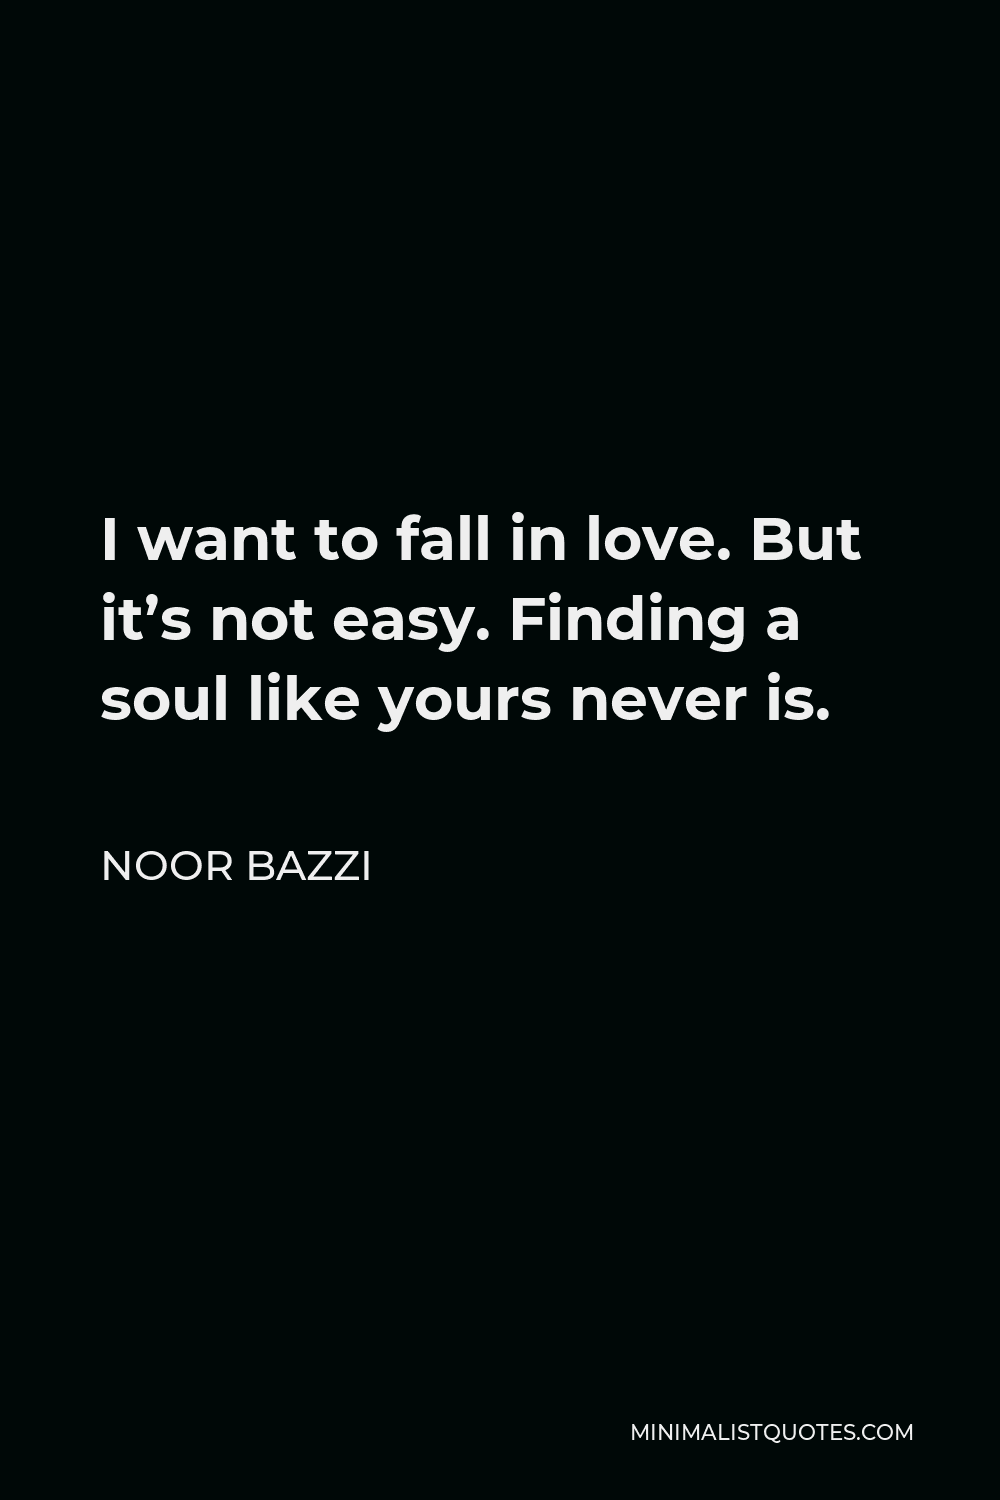 Noor Bazzi Quote - I want to fall in love. But it’s not easy. Finding a soul like yours never is.